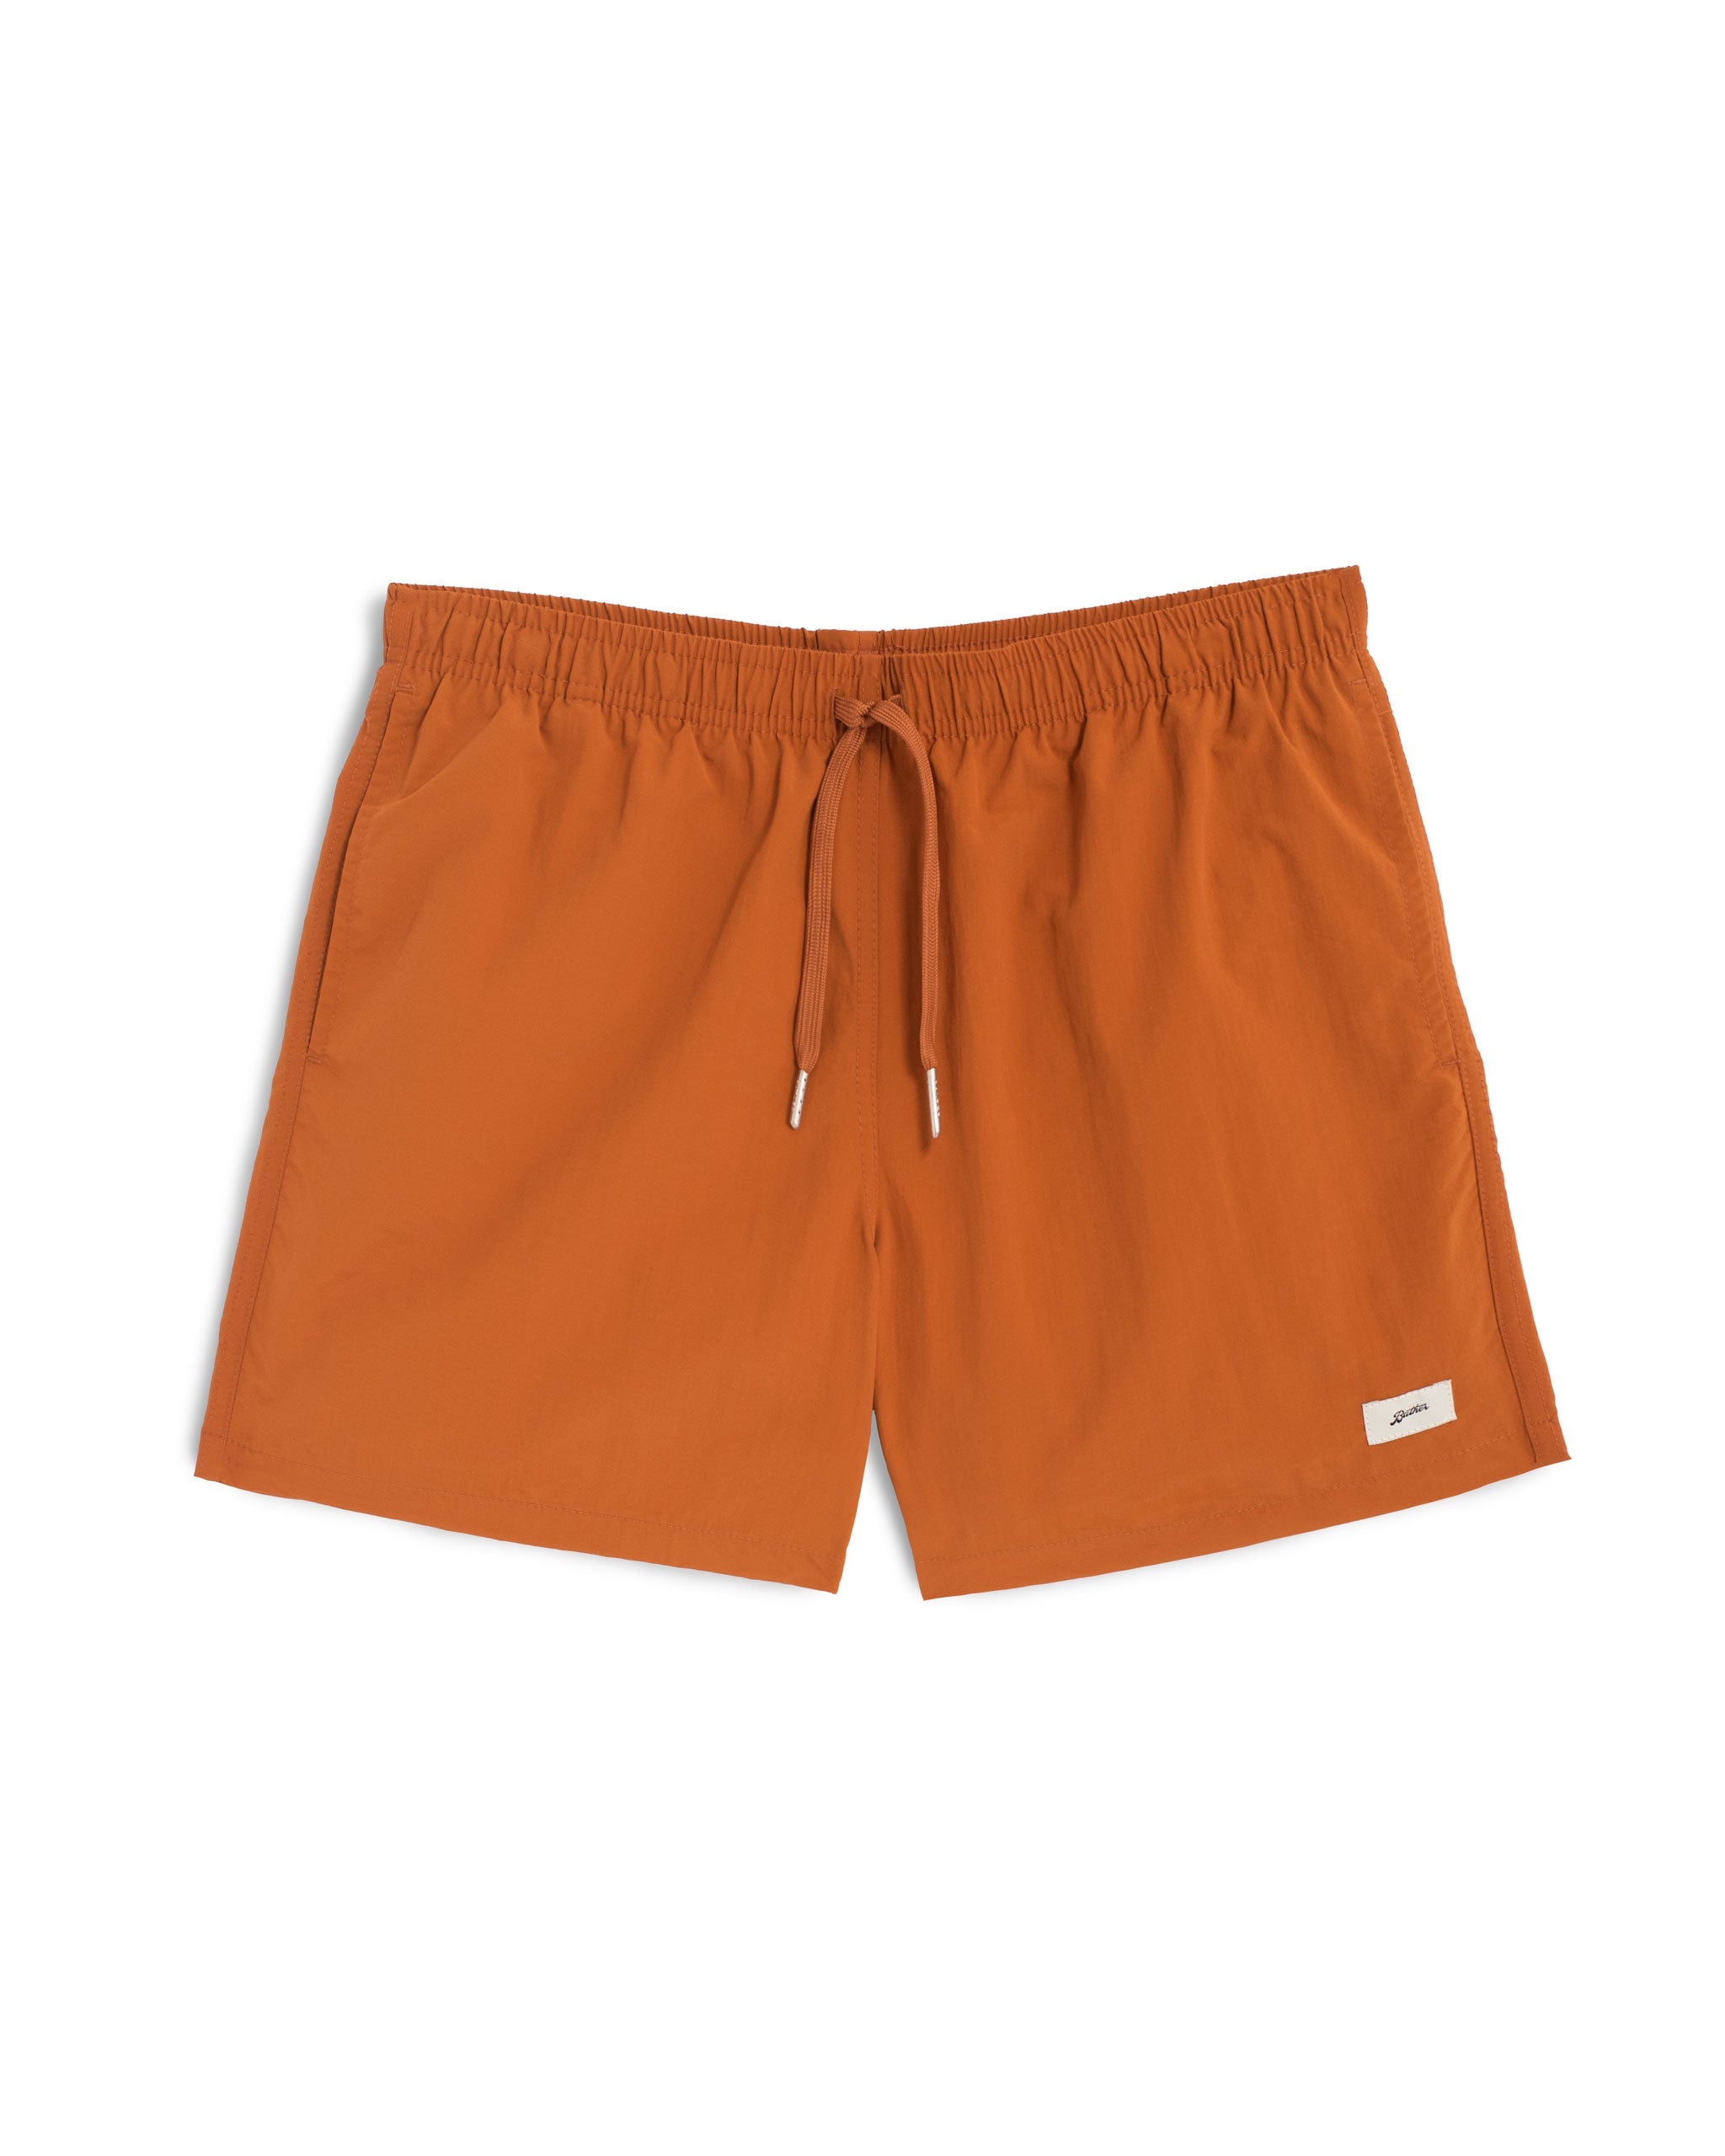 A solid orange swim trunk in ginger orange with a matching drawstring